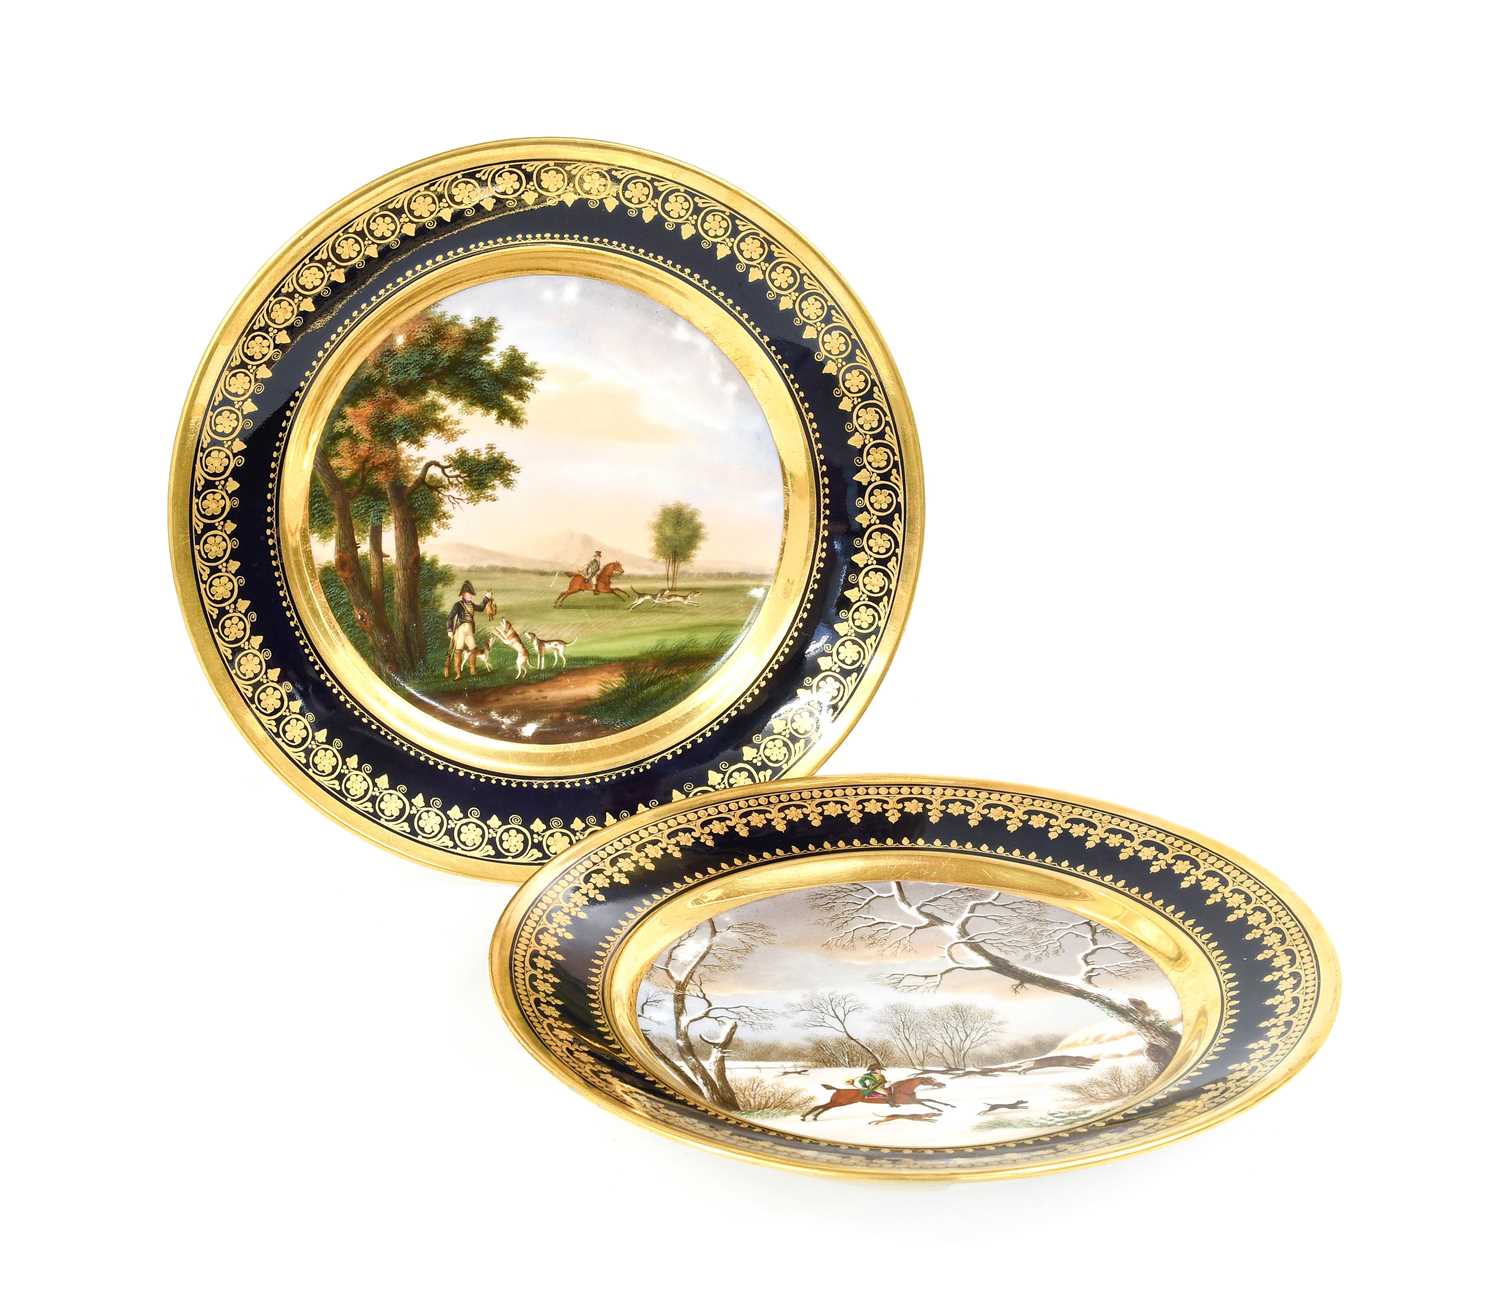 Two Darte Porcelain Plates, circa 1810, with gros bleu and tooled gilt borders framing painted